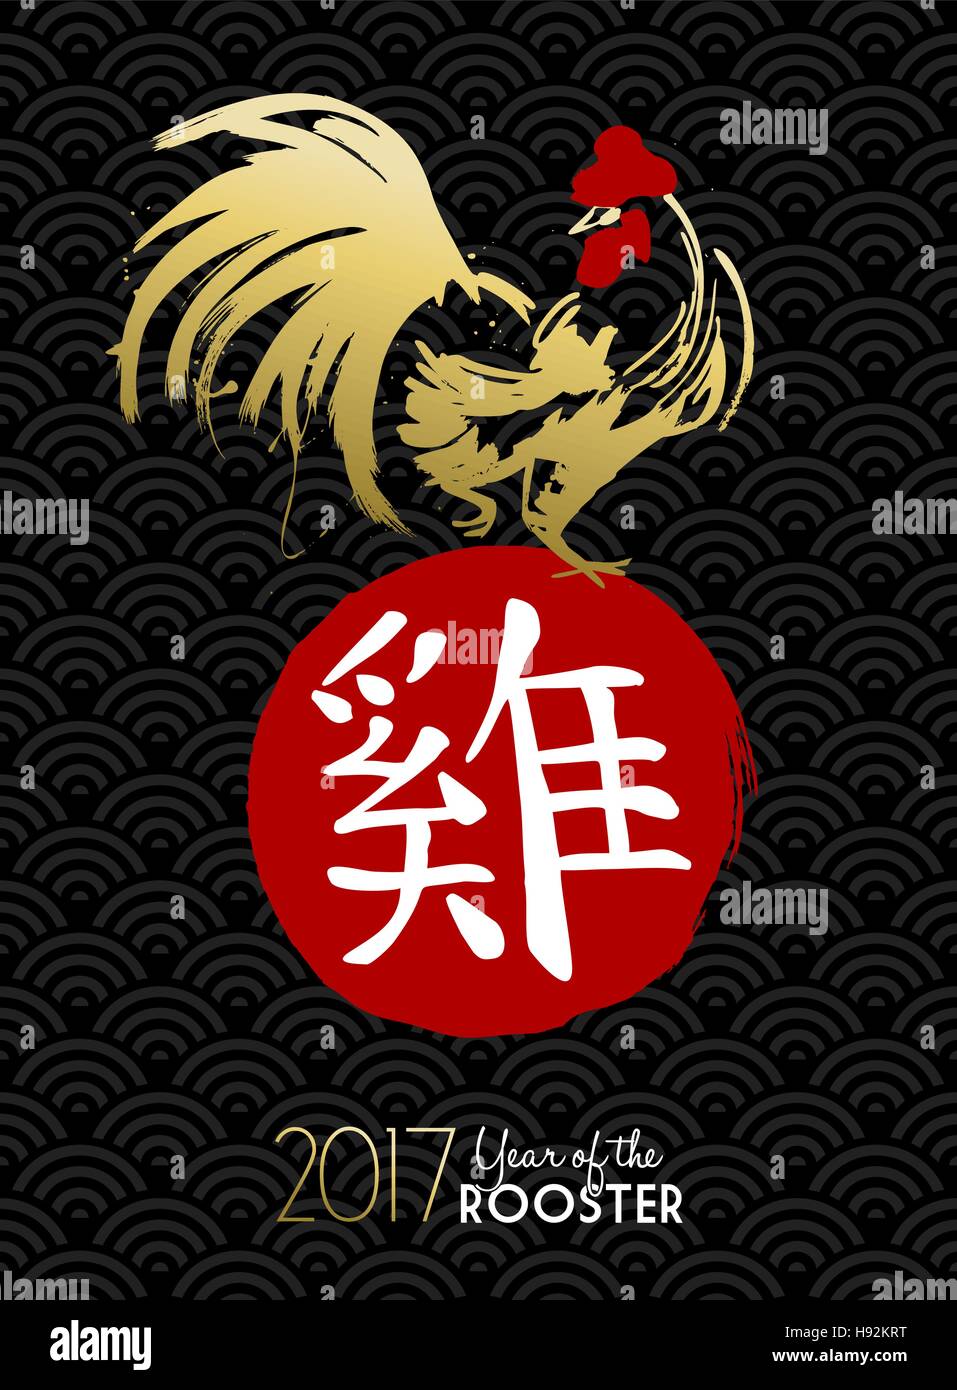 Happy Chinese New Year 2017, hand drawn art in gold color with traditional calligraphy that means Rooster. EPS10 vector. Stock Vector